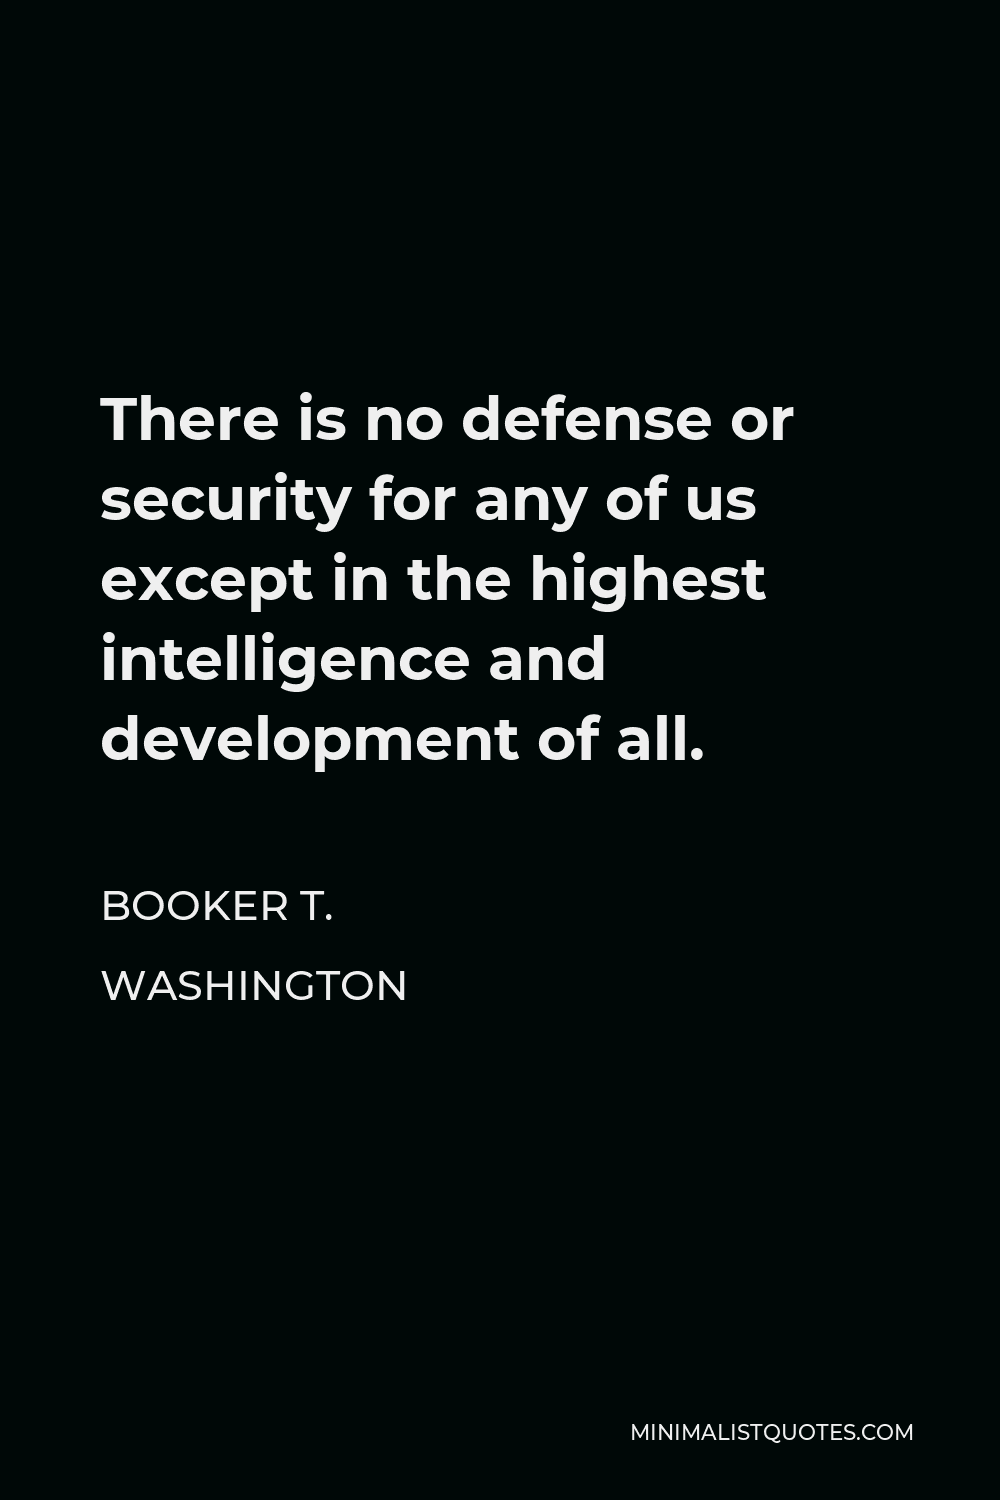 Booker T. Washington Quote - There is no defense or security for any of us except in the highest intelligence and development of all.